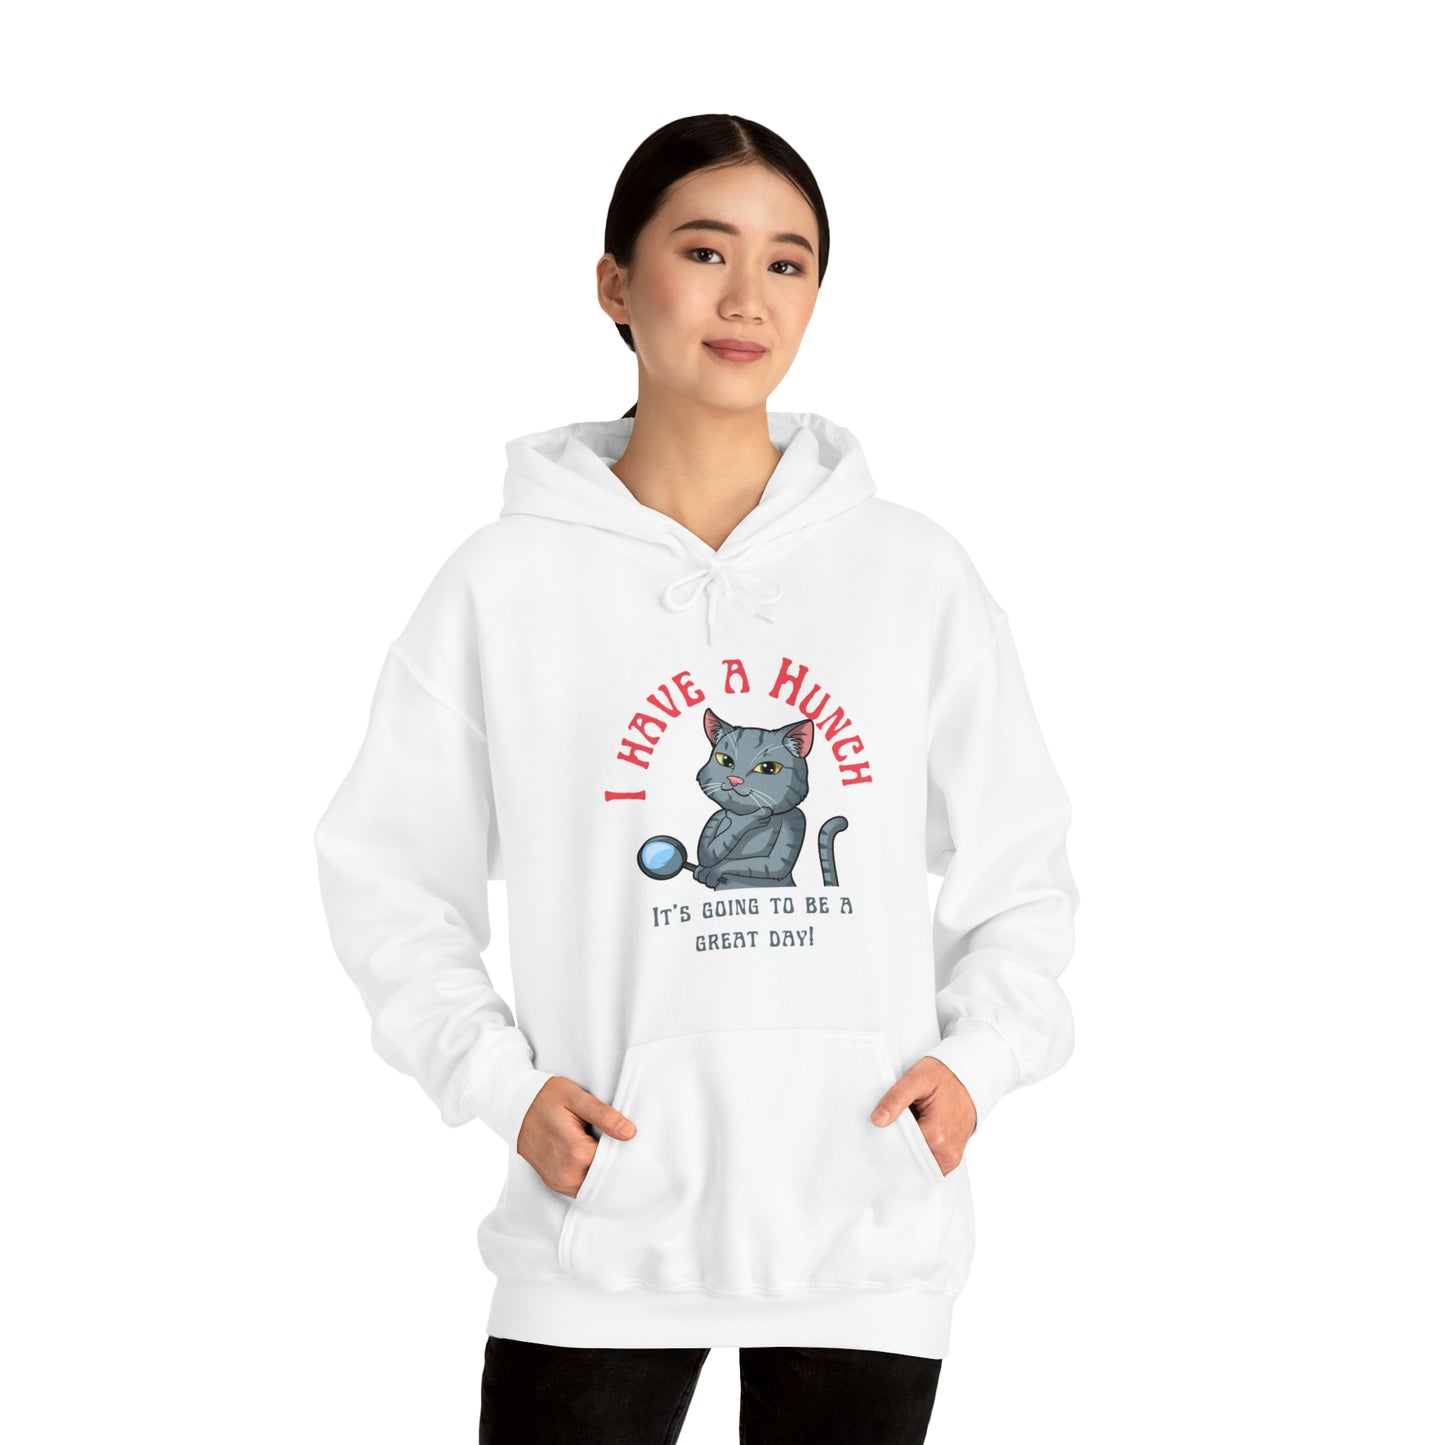 I have a Hunch it's going to be a great day! Unisex Heavy Blend™ Hooded Sweatshirt